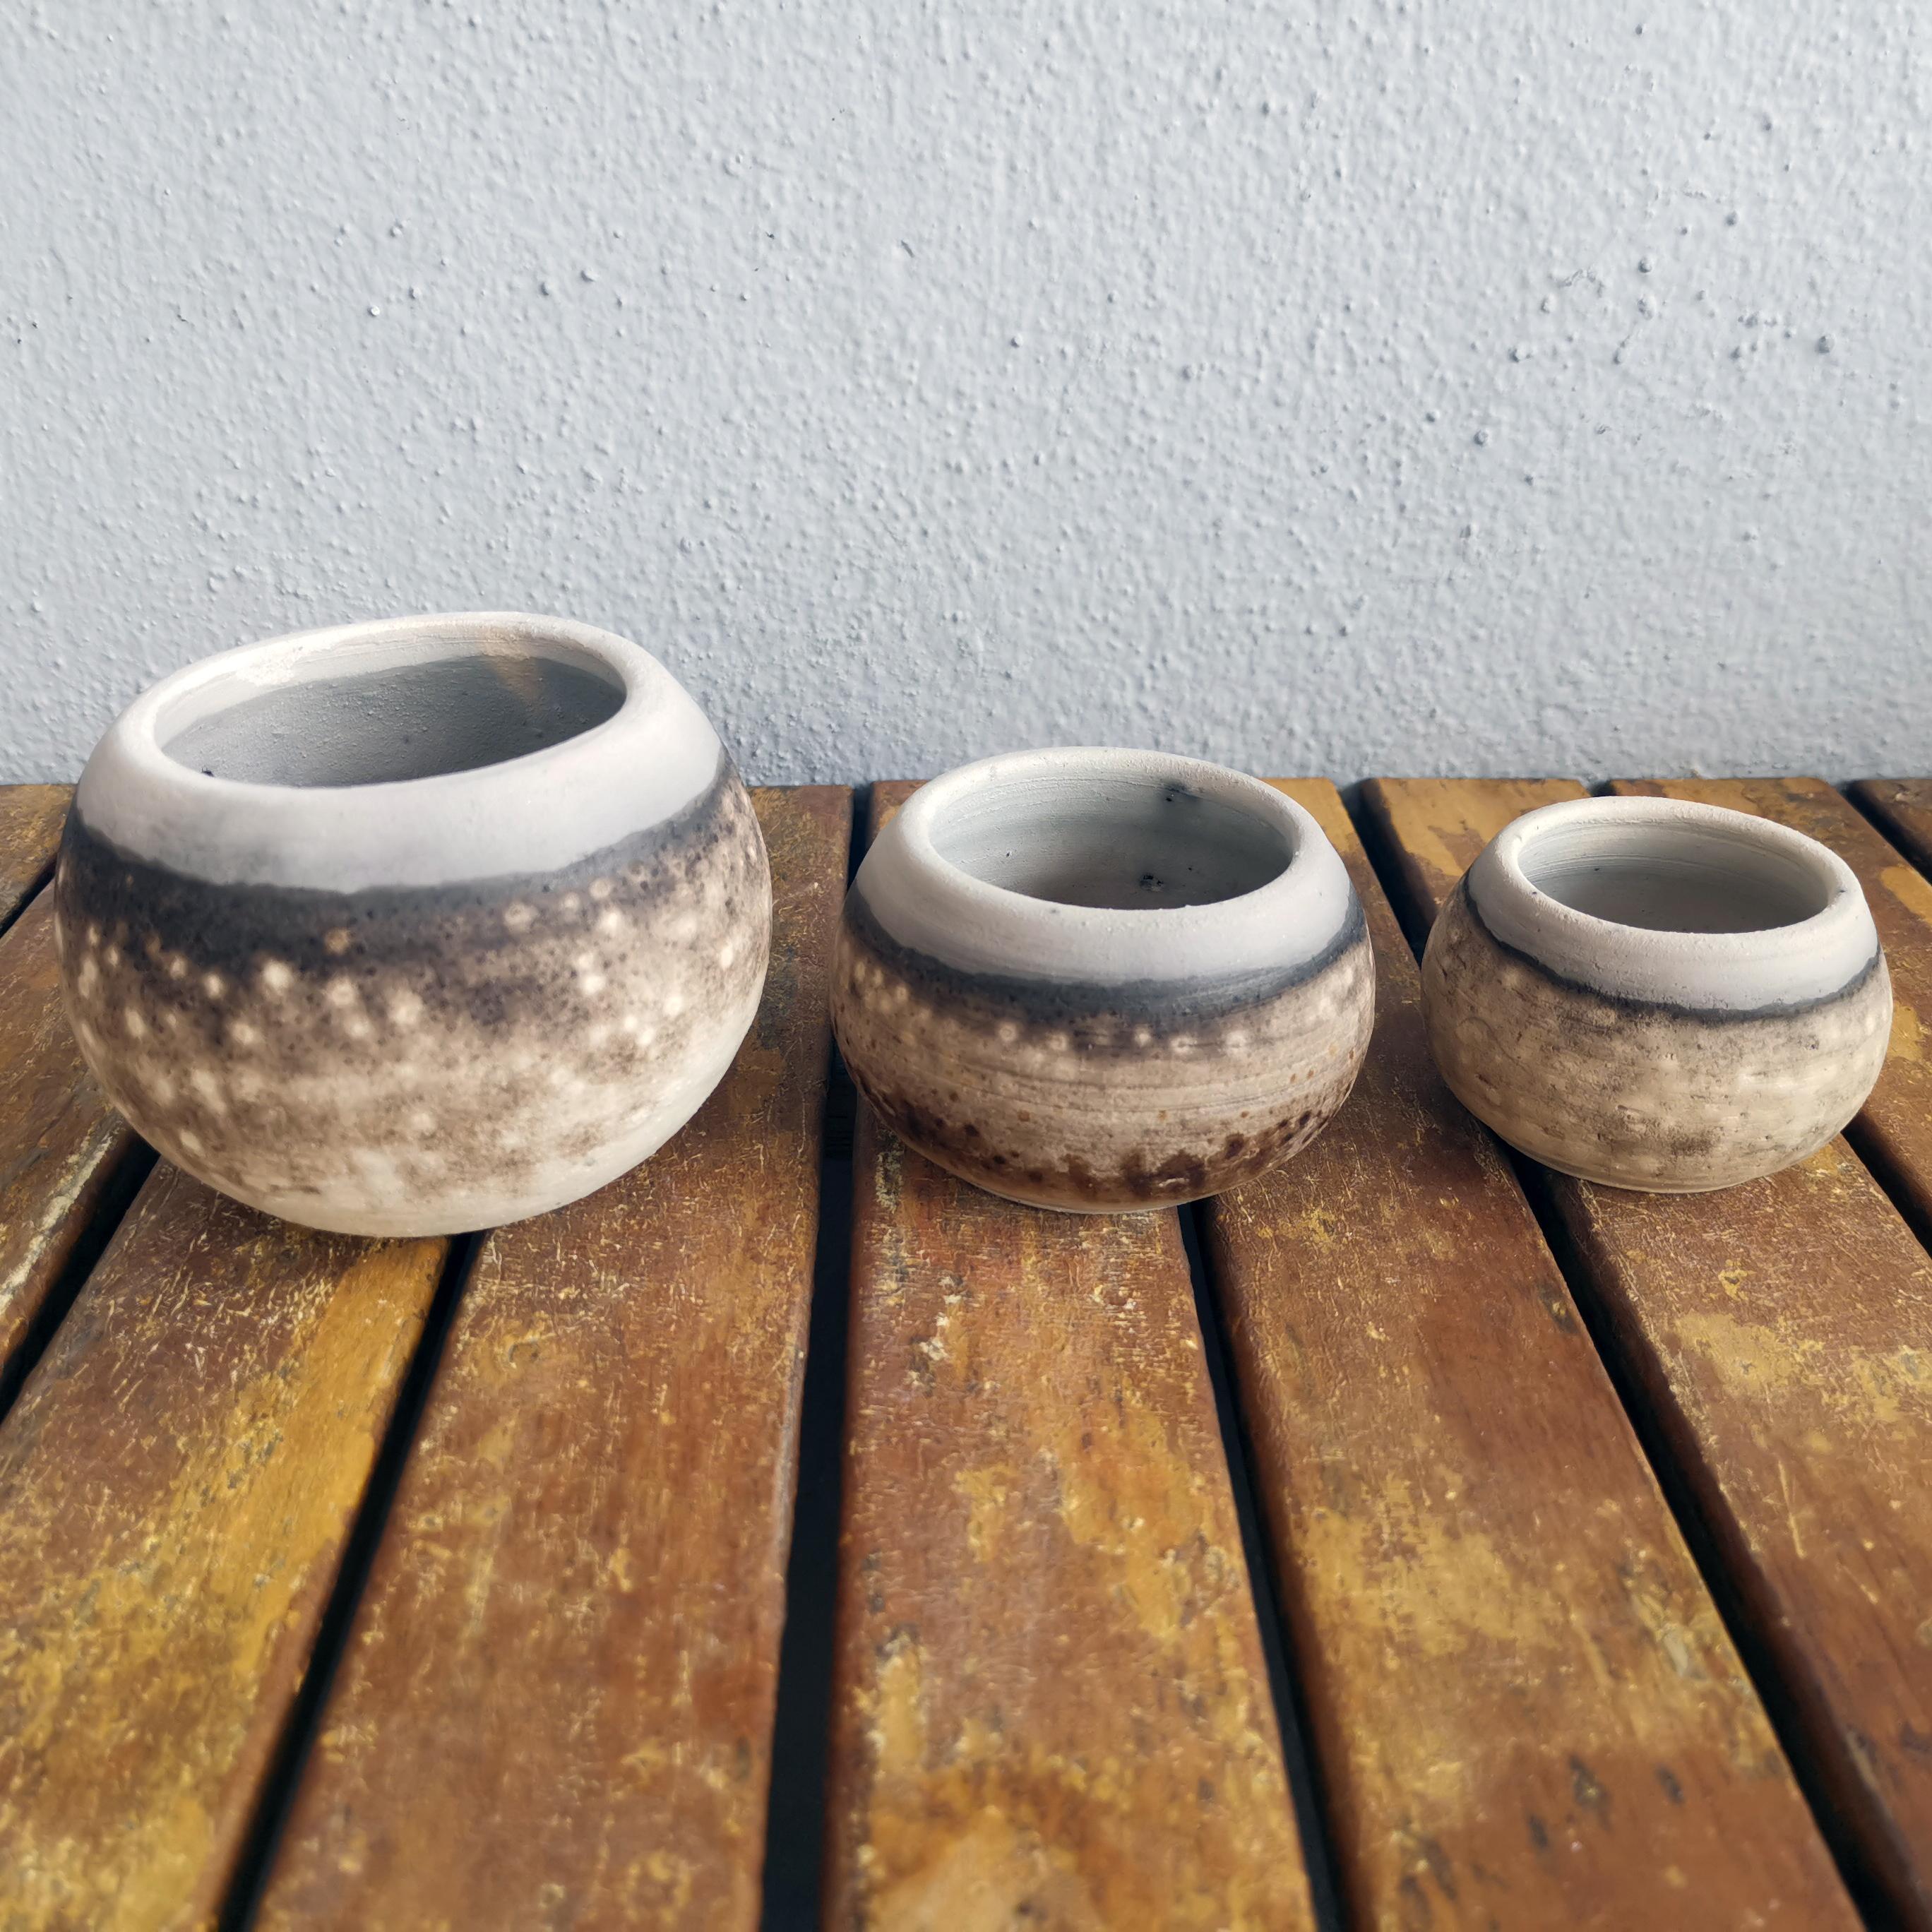 Tsuchi - Earth

*Plants are not included in this purchase

Our Tsuchi pot is named after the medium it holds ; Earth. This pot is double sealed to prevent moisture from seeping into the ceramic and created with up to 3 holes at the bottom for